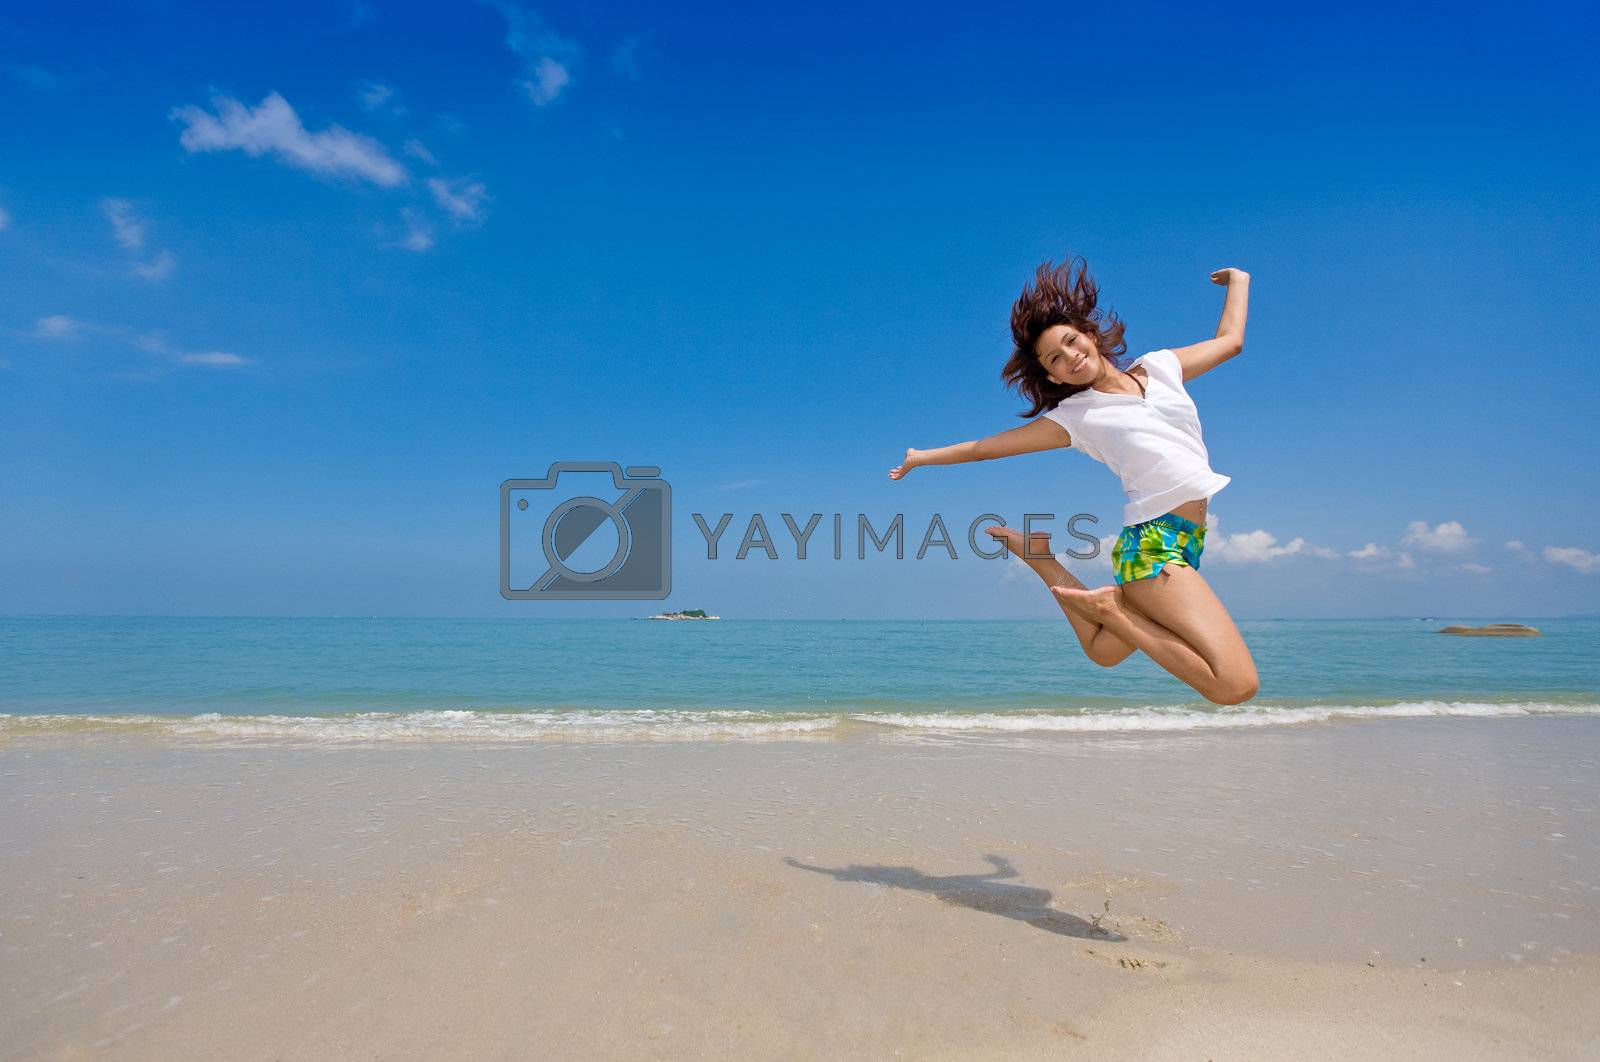 Royalty free image of happy jump by eyedear